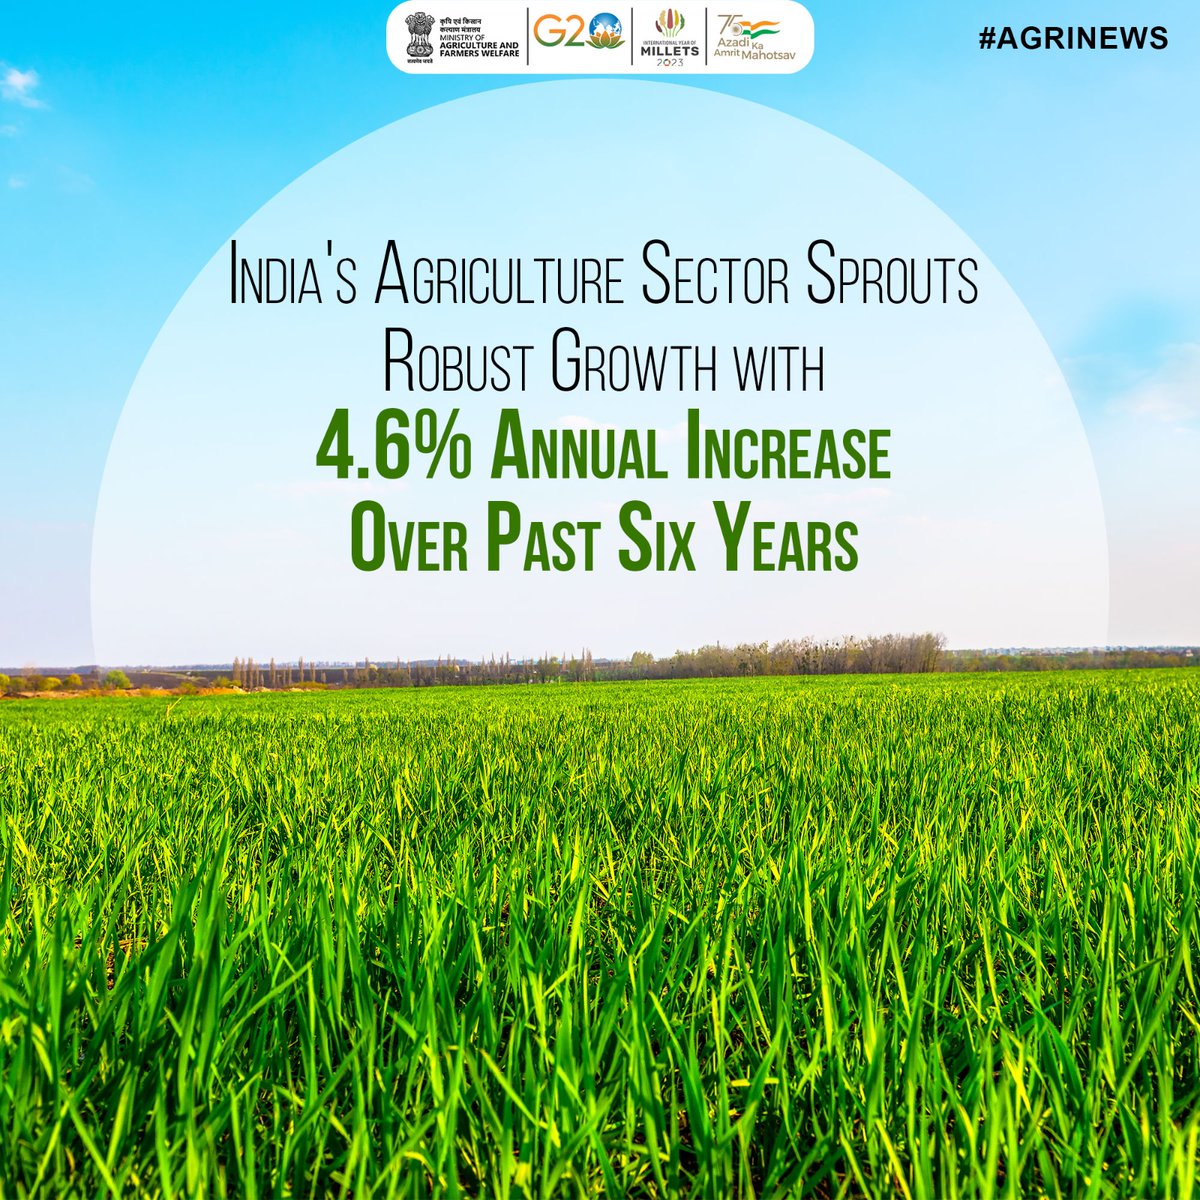 India's agriculture sector has exhibited robust growth with a steady annual increase of 4.6% over the past six years.
#agrigoi #agriculture #growth #aatmanirbharkrishi #aatmanirbharkisan #agrinews